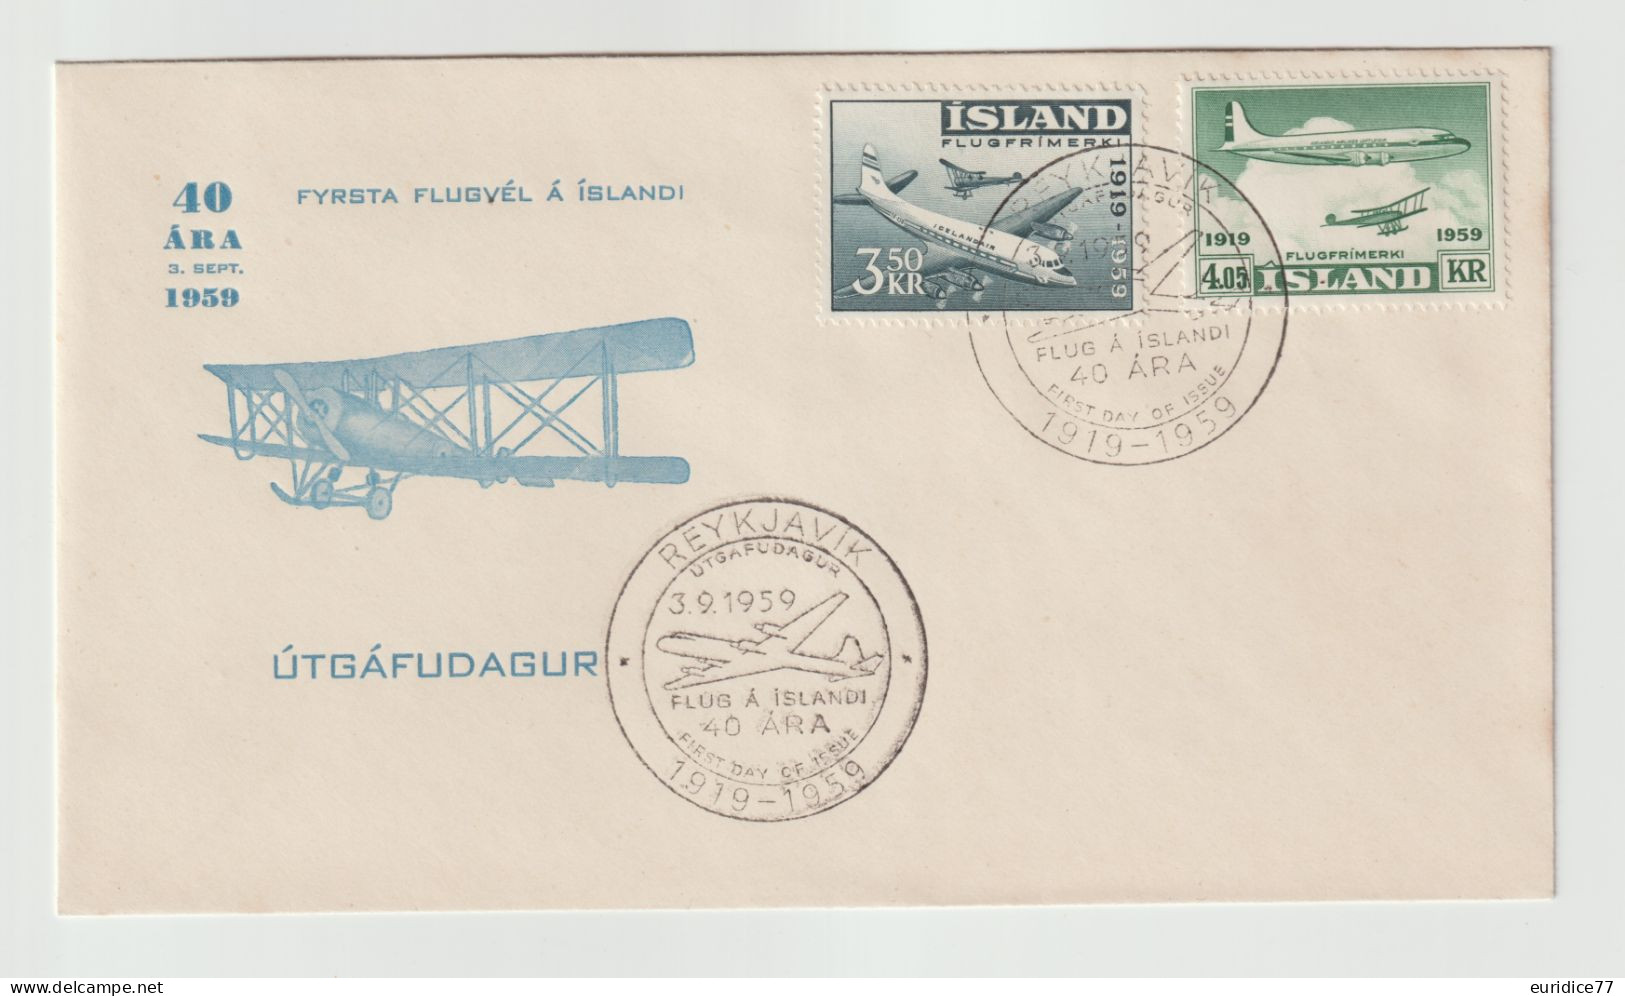 Iceland Islande 1959 - First Day Cover - FDC